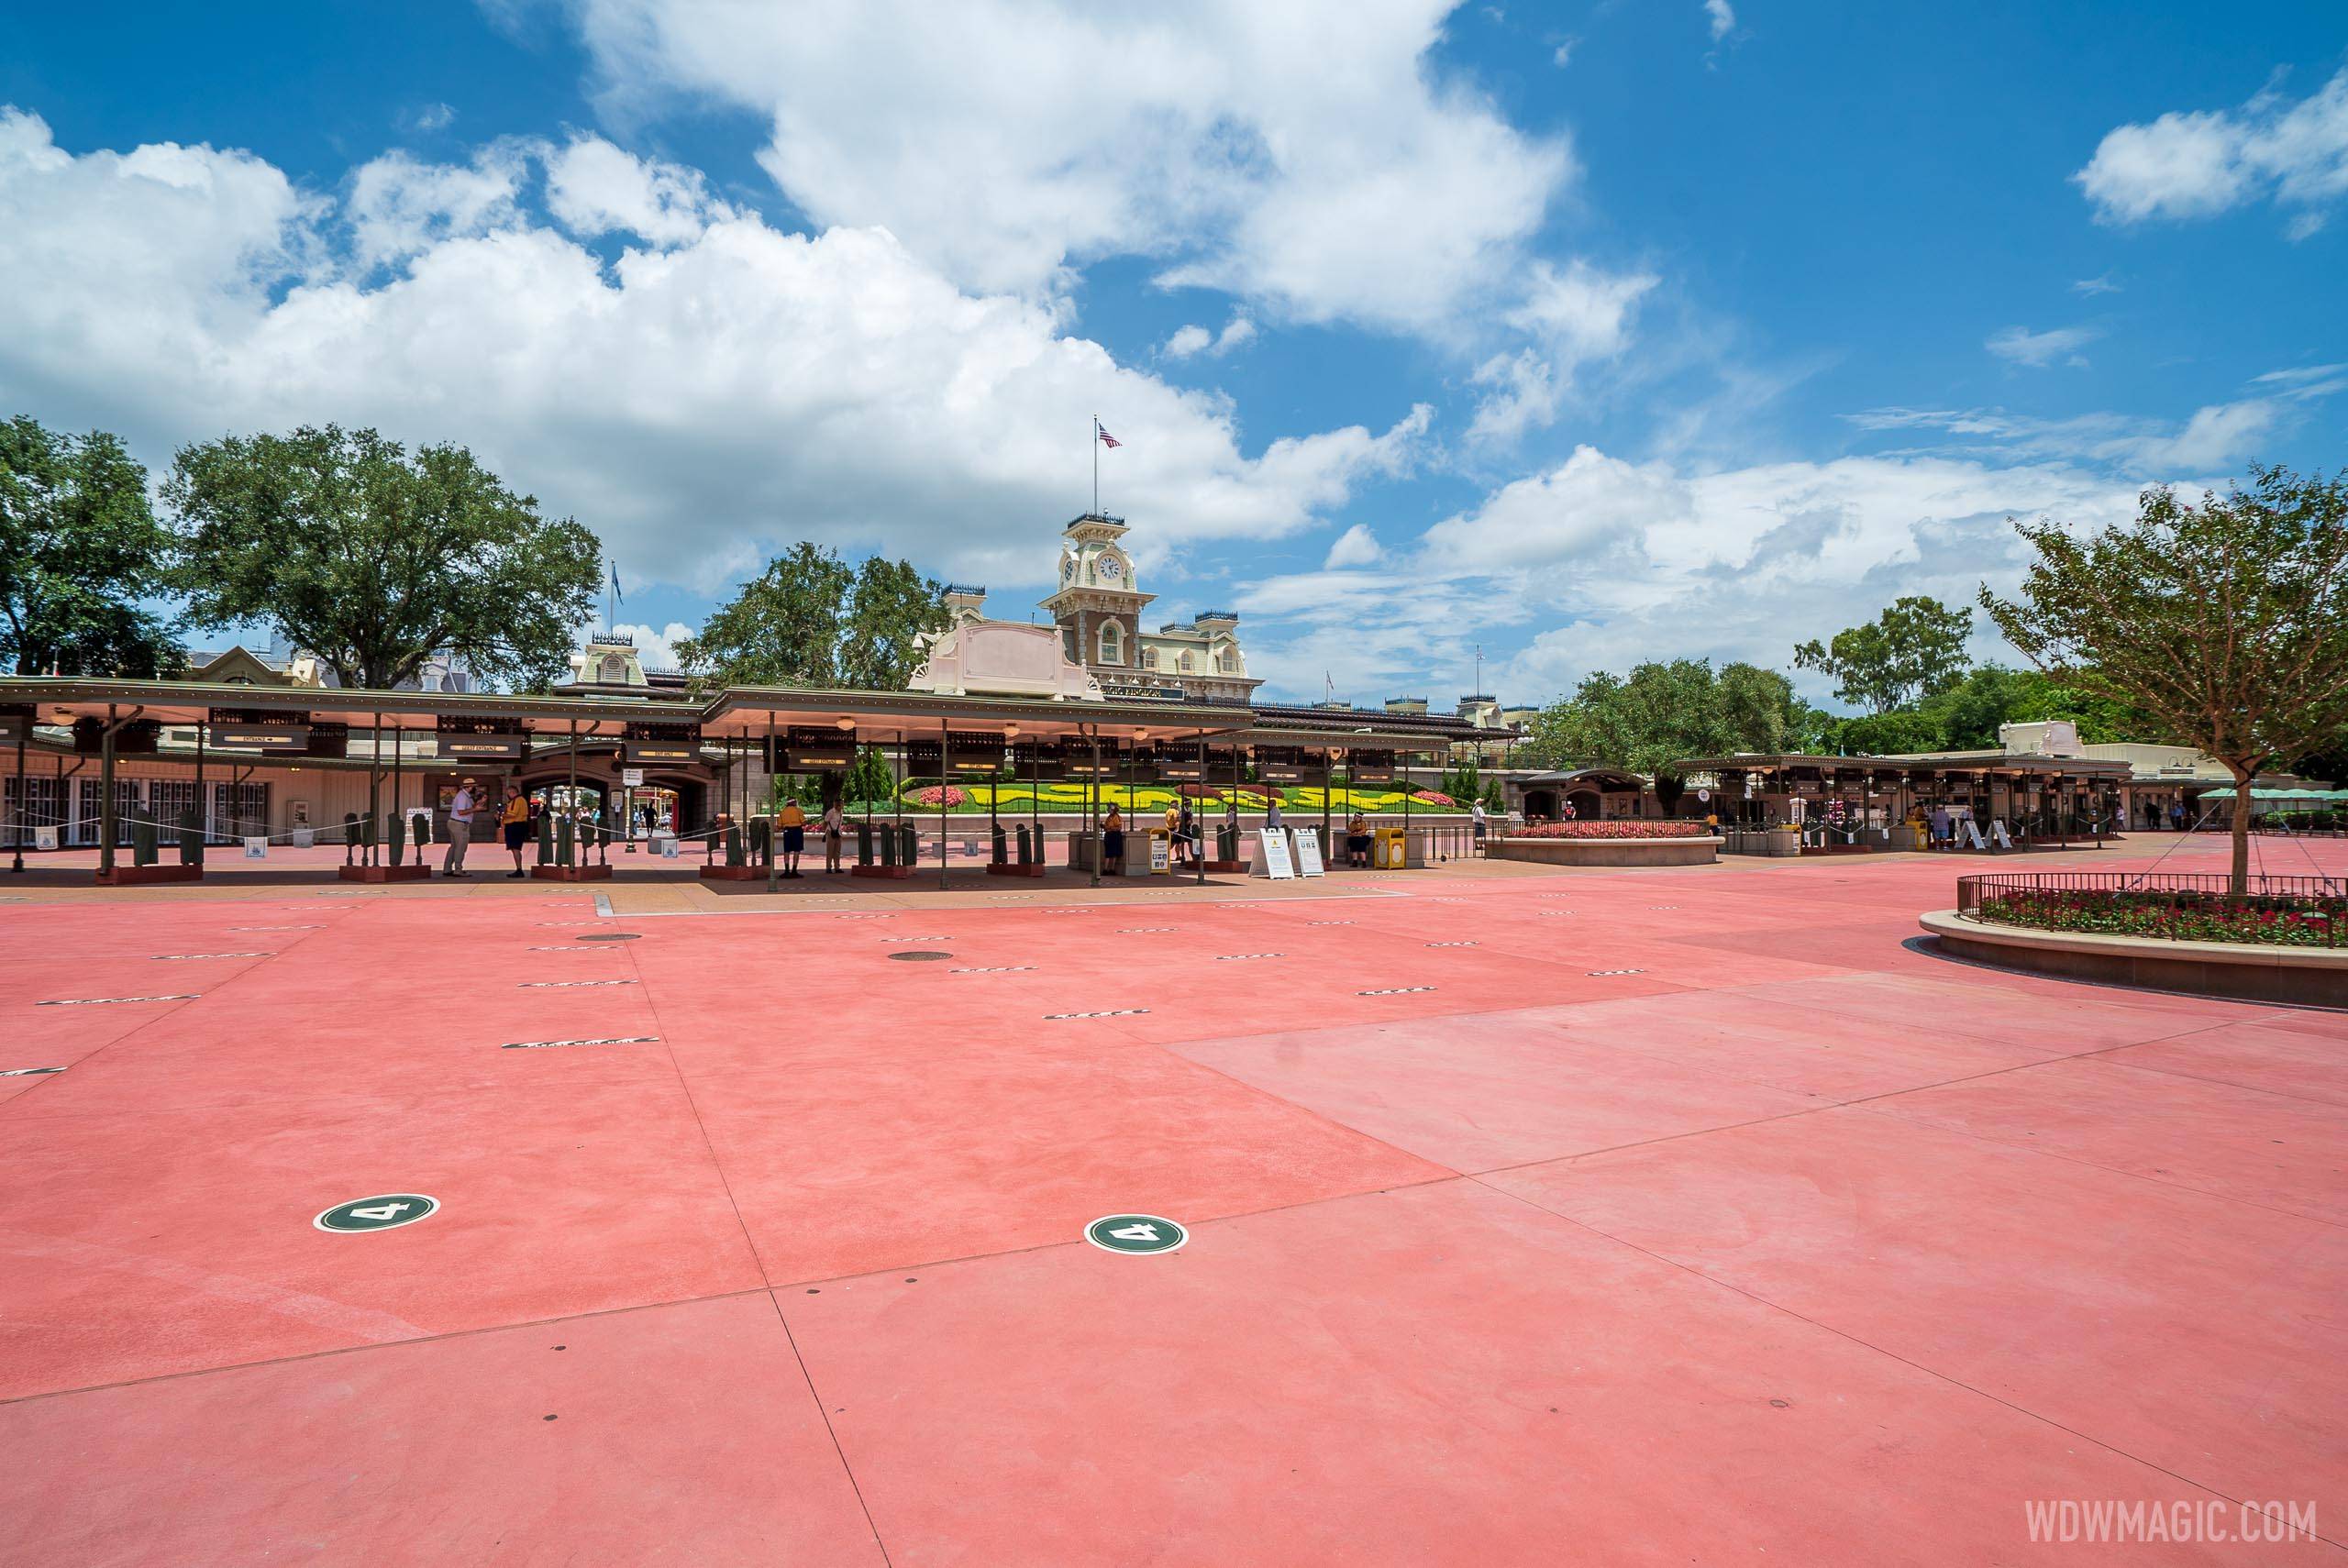 Magic Kingdom will close an hour earlier from September 8